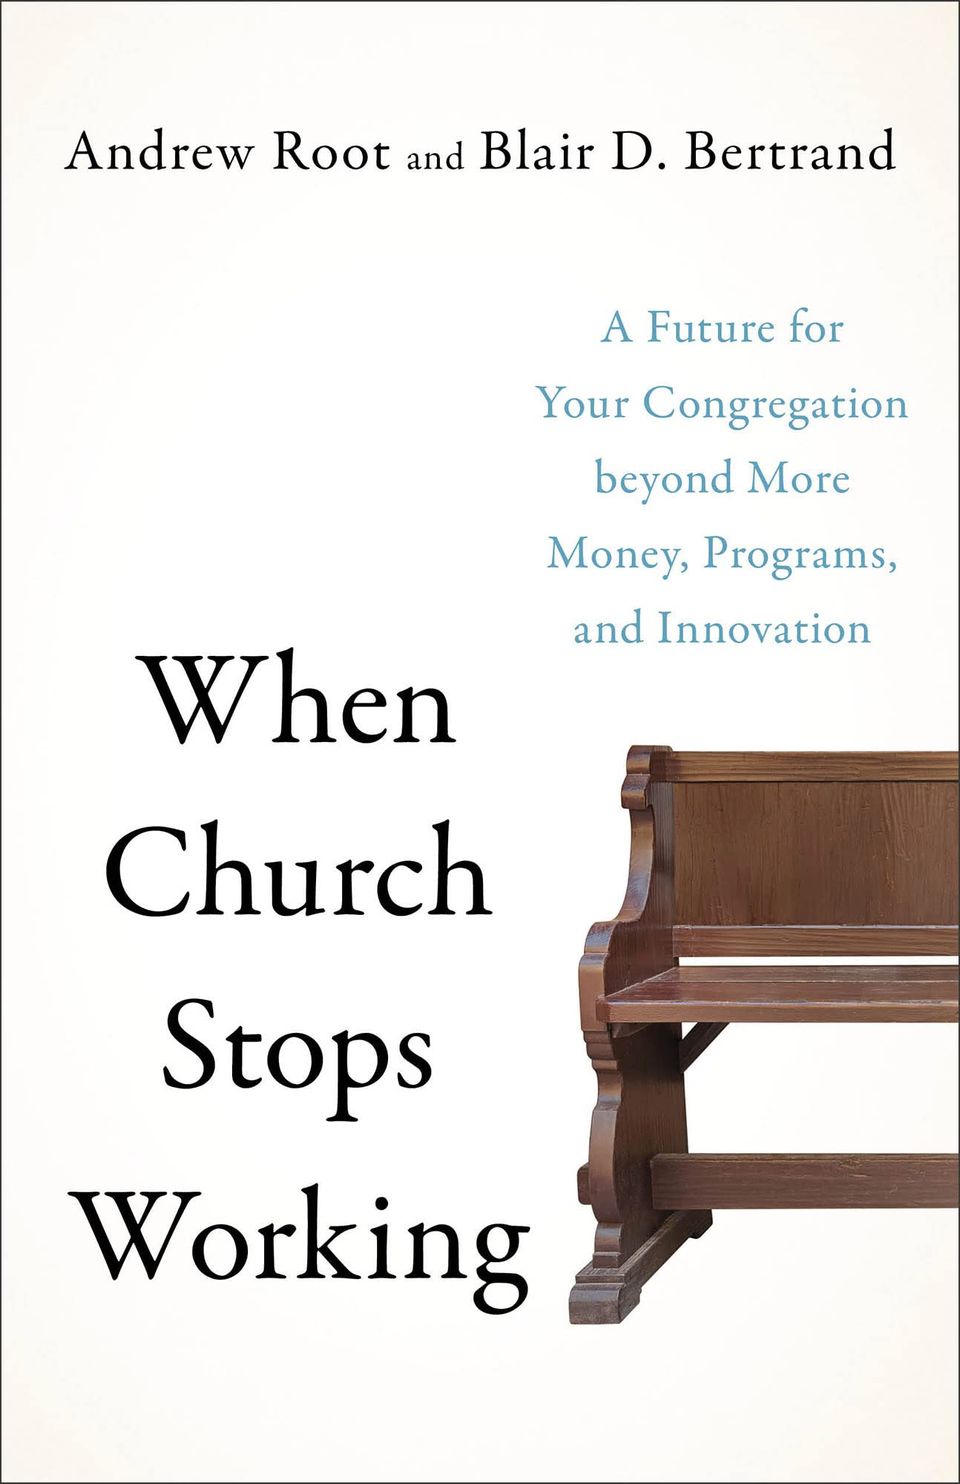 The book cover which is the end of a pew on a white background.